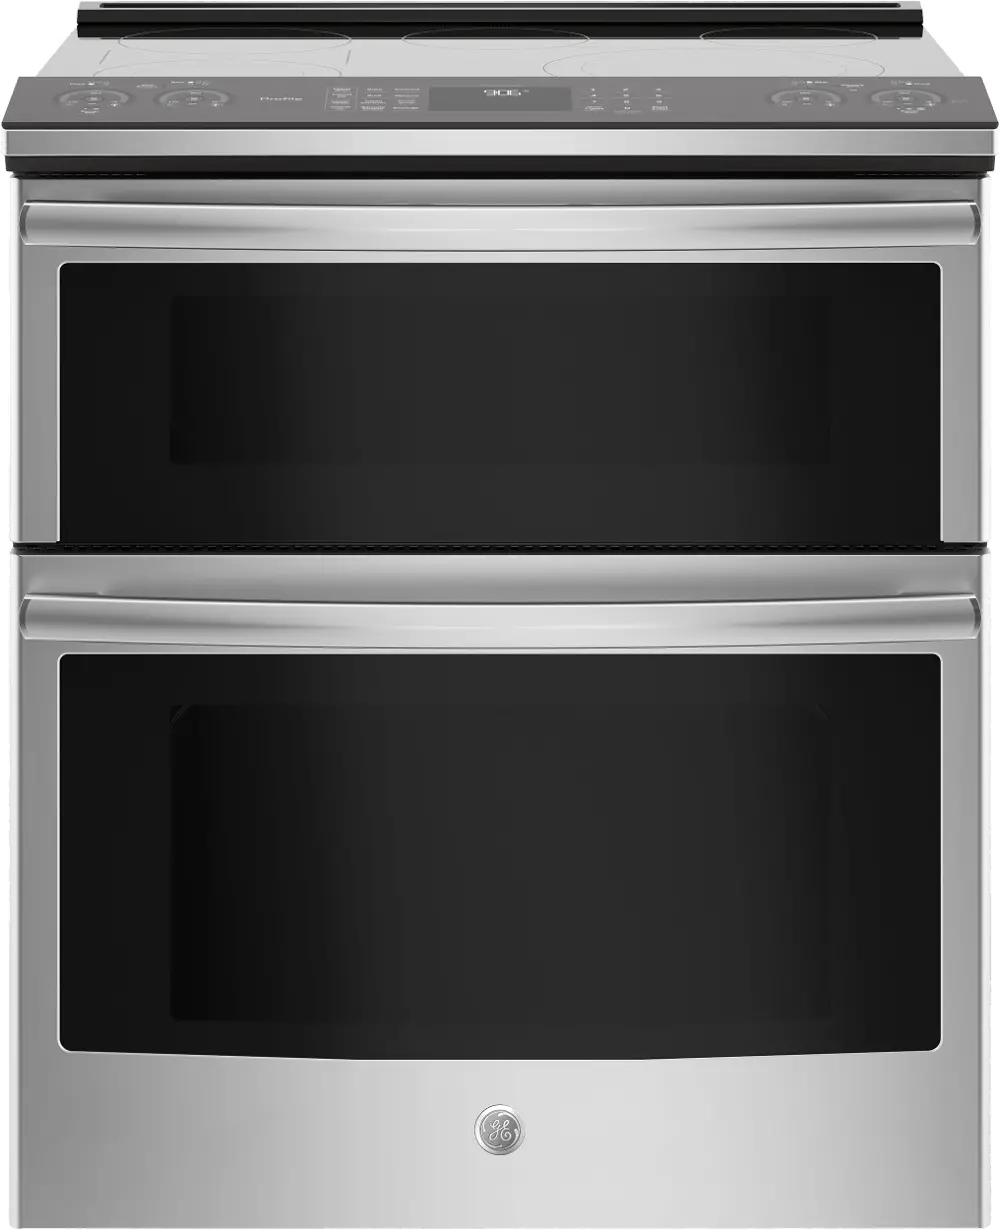 PS960SLSS GE Profile Double Oven Electric Smart Range - 6.7 cu. ft. Stainless Steel-1